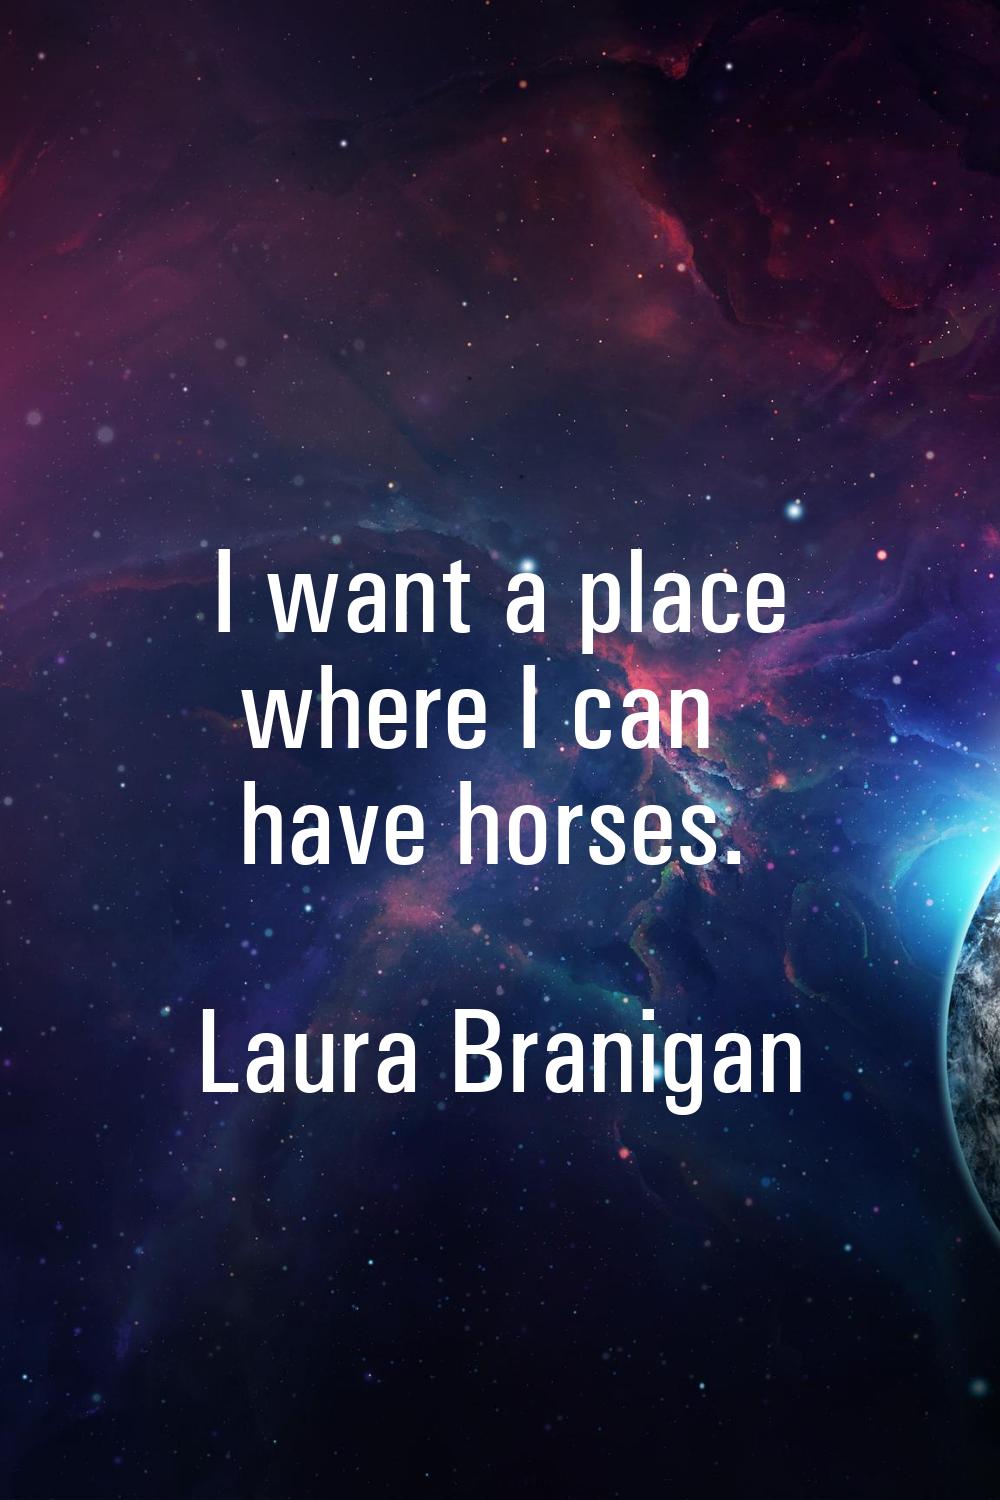 I want a place where I can have horses.